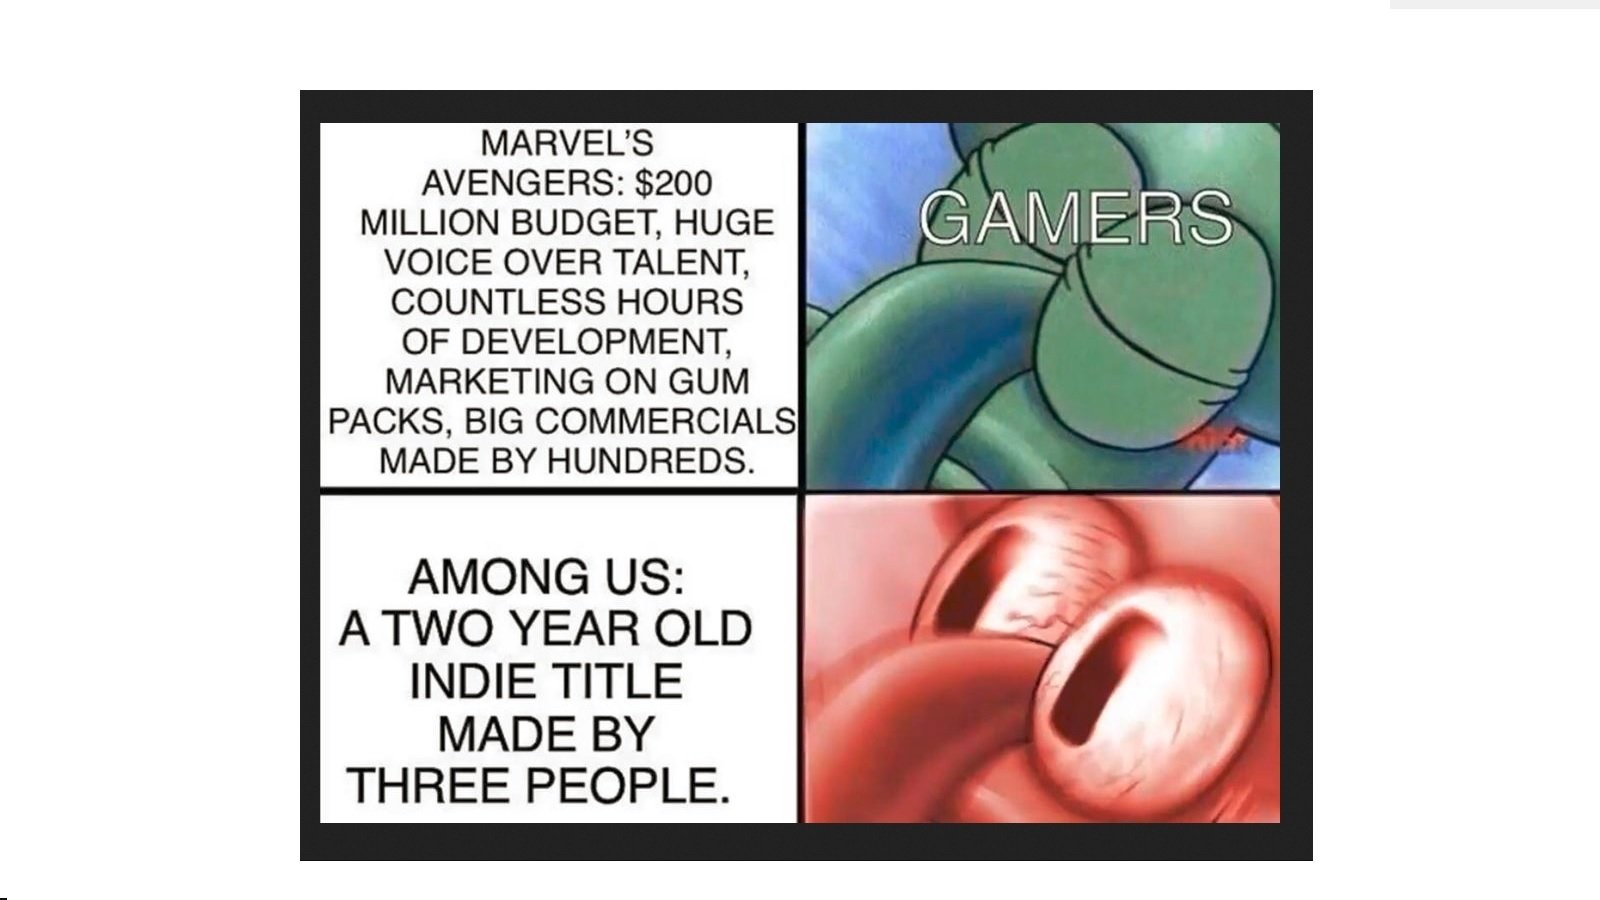 among us a two year old indie title meme